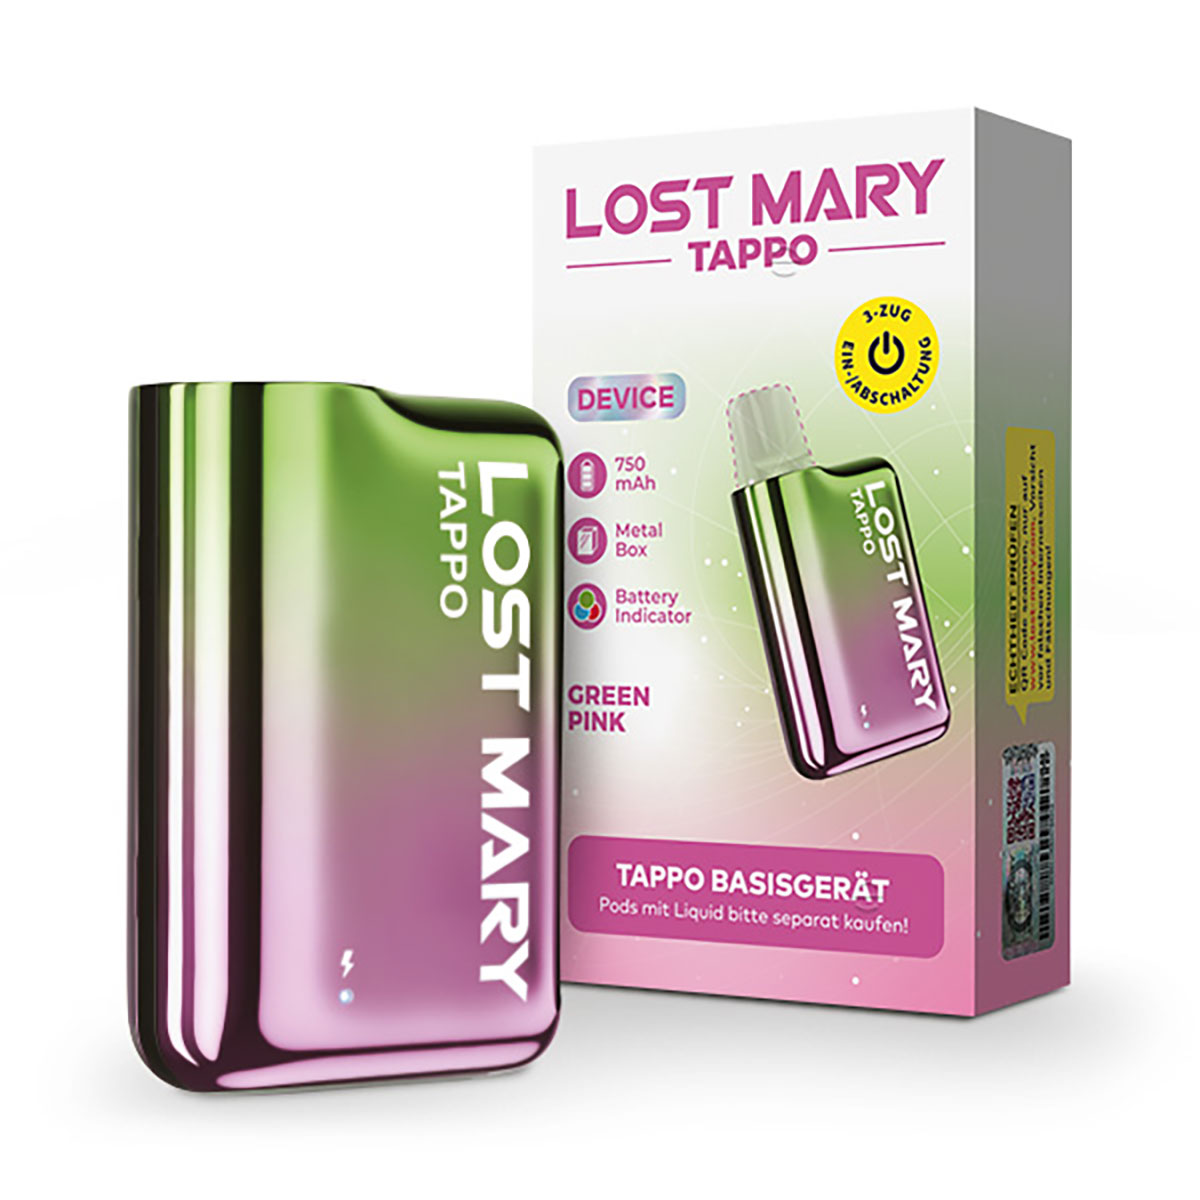 Lost Mary Tappo Green Pink Device